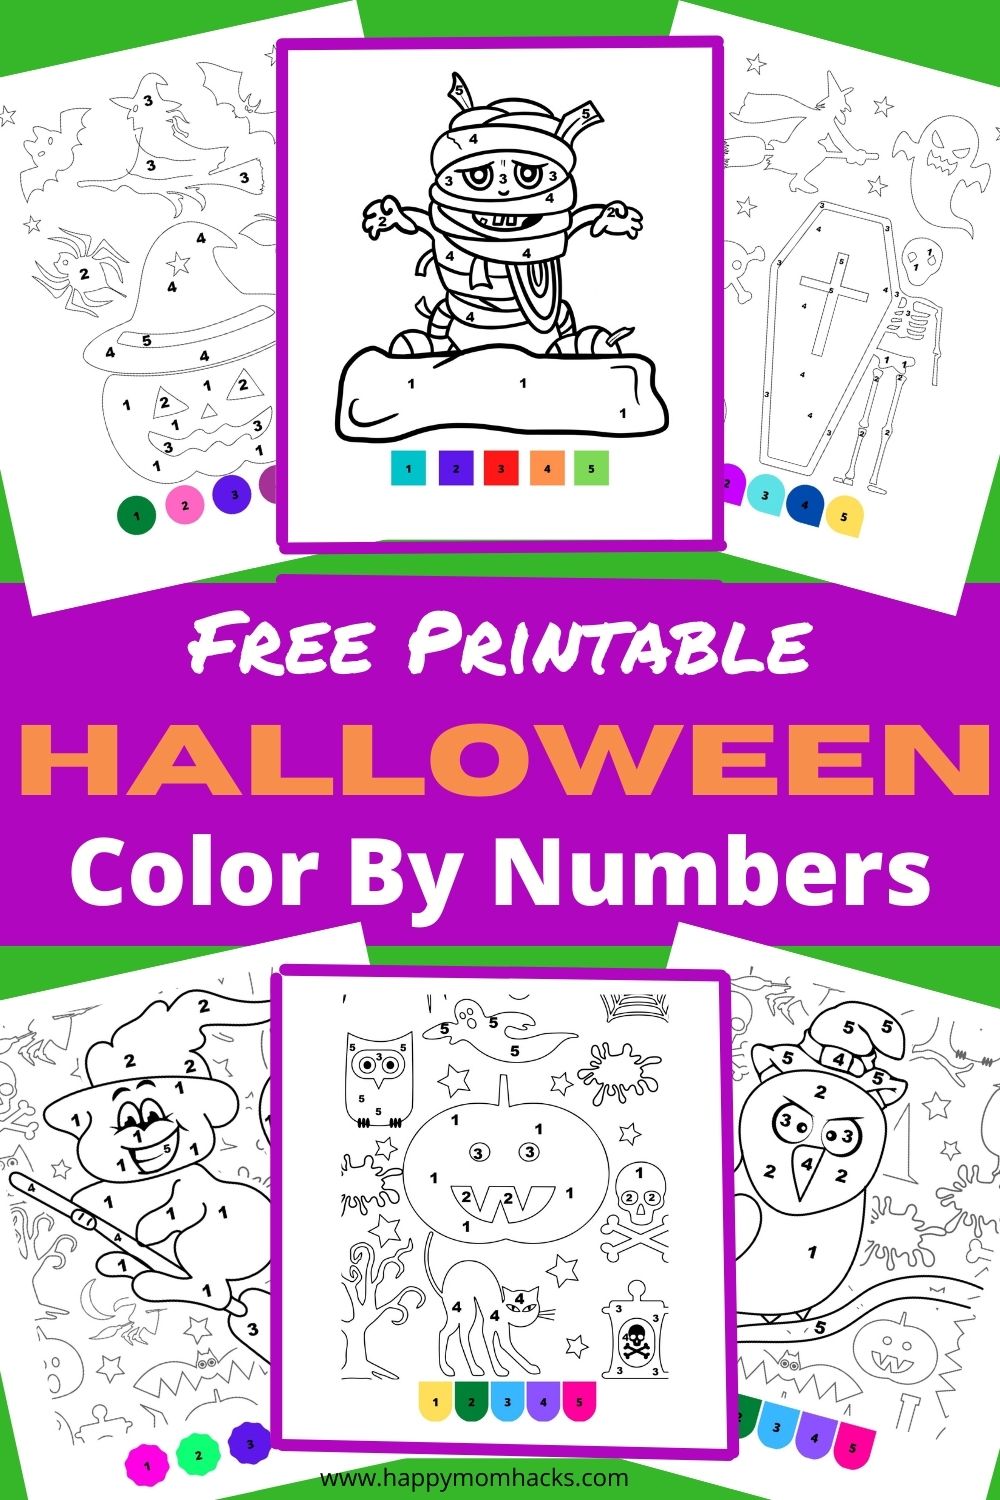 Free printable halloween color by number sheets